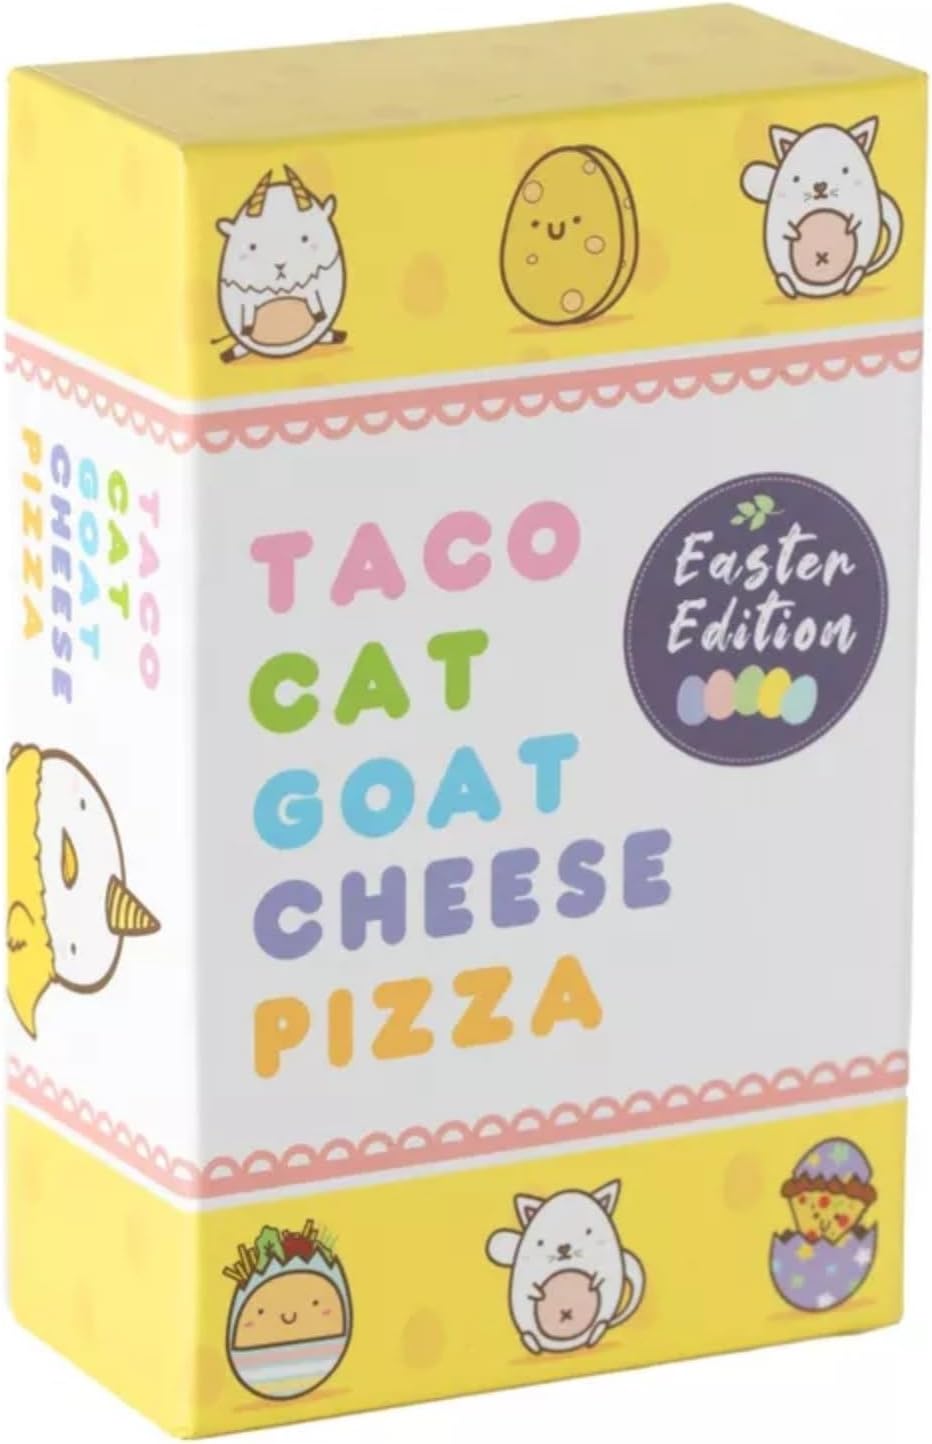 Taco Cat Goat Cheese Pizza - Easter Edition! | CCGPrime